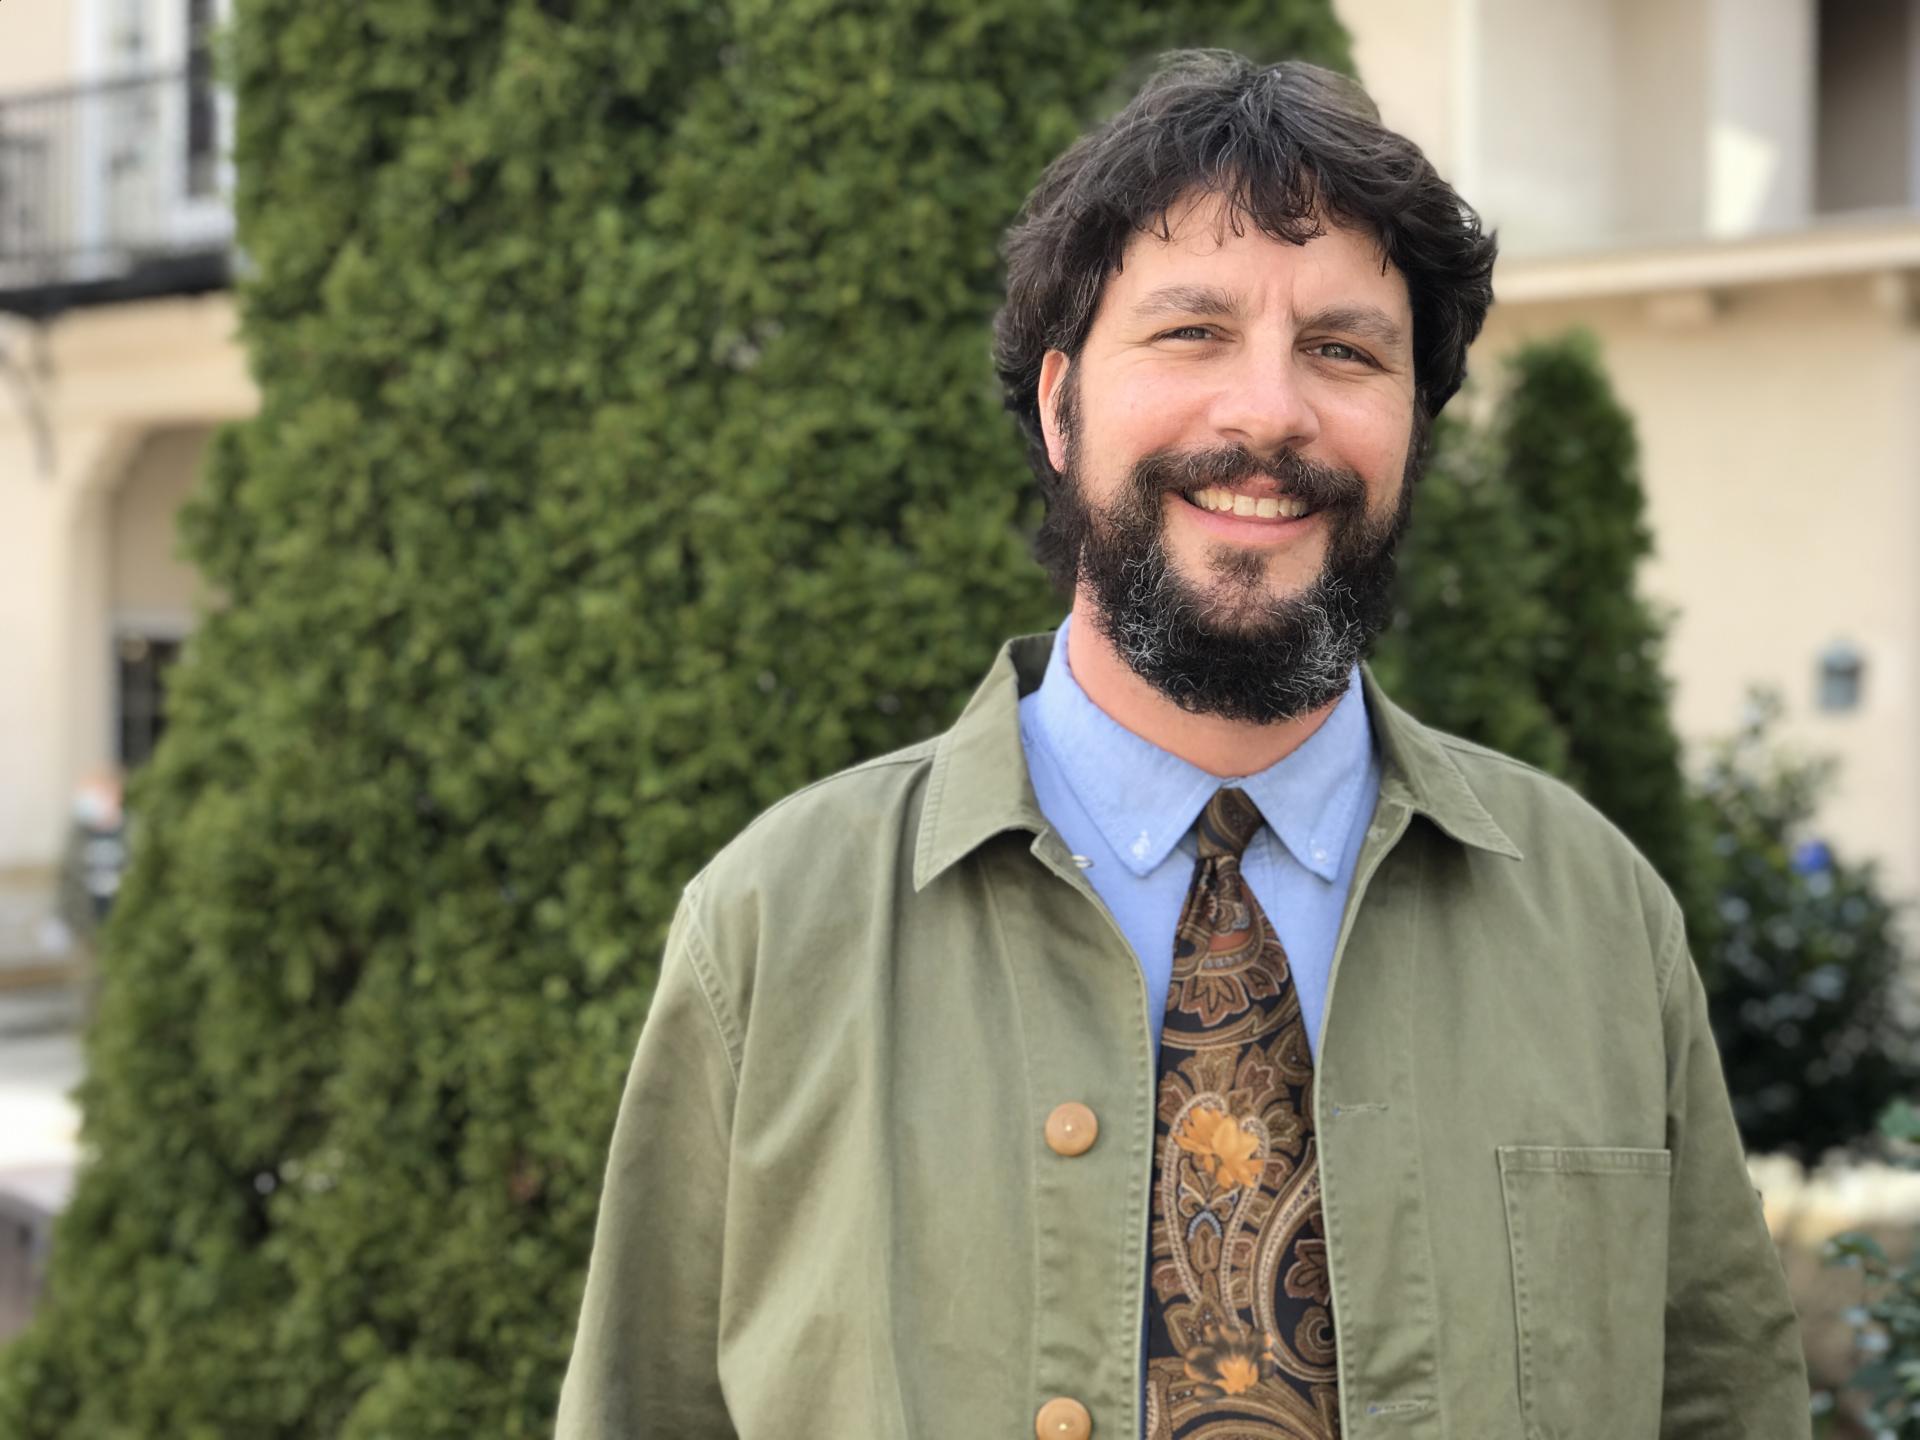  “I have seen firsthand the dramatic turnaround in not just academic skills but also in confidence and self-esteem.”     Peter Harris, EMS Teacher     Faculty Voices     